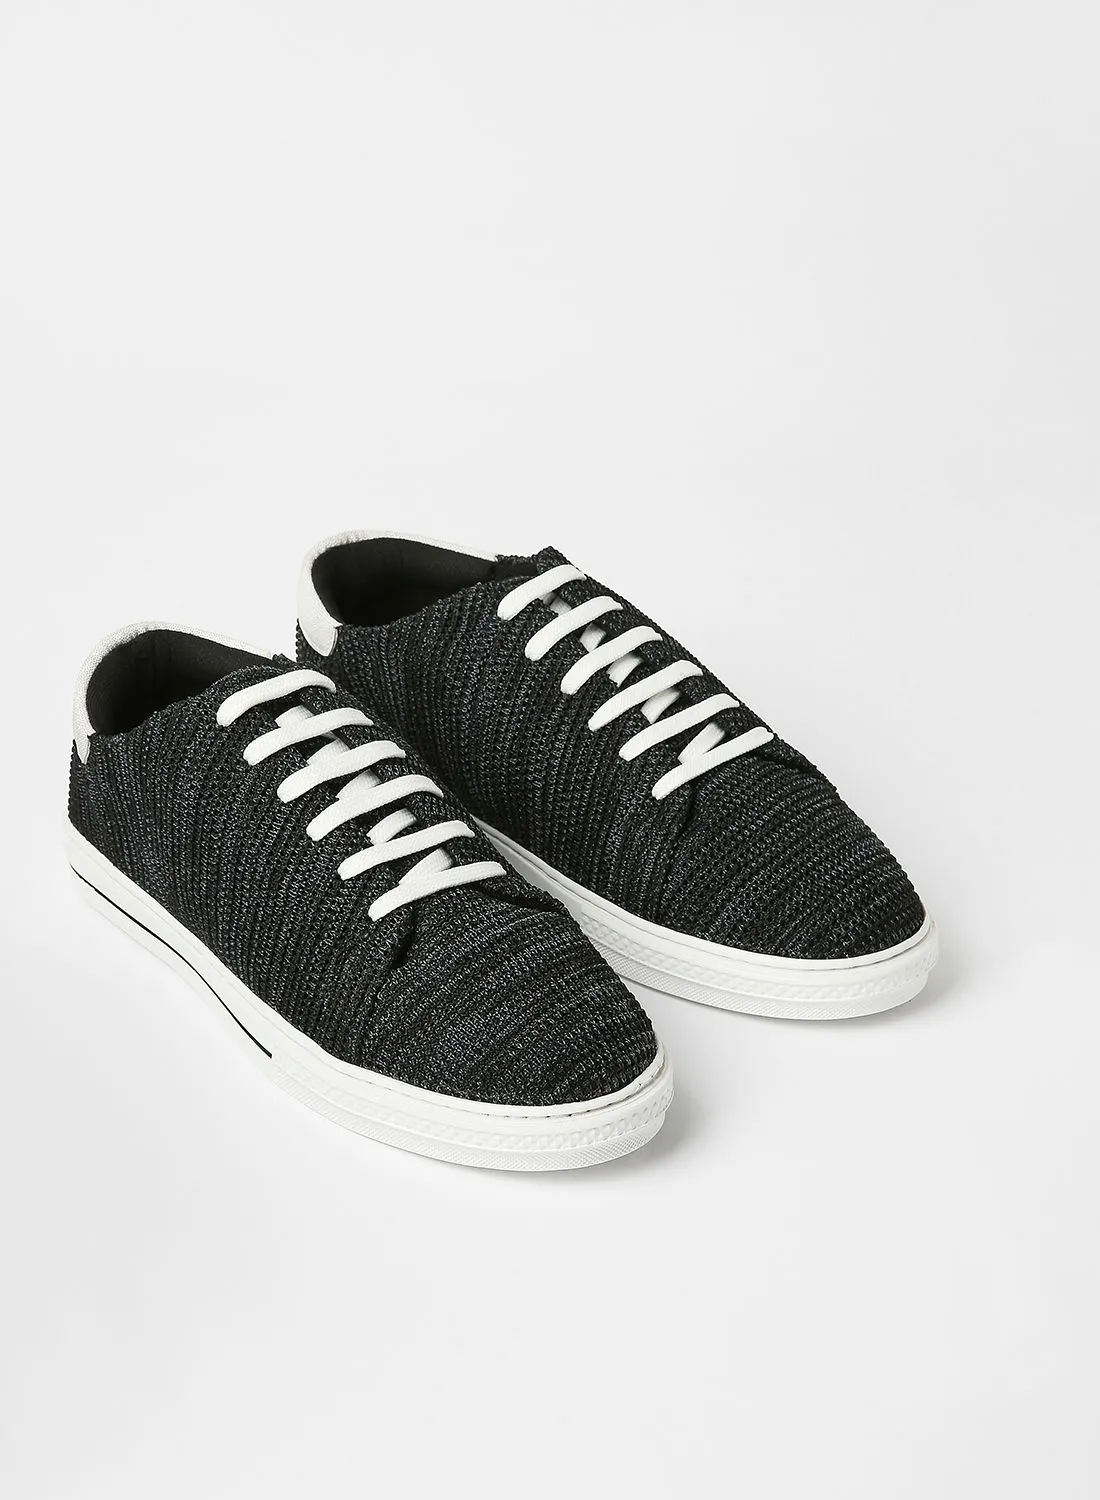 Geoomnii Mesh Pattern Lace-Up Low Top Sneakers Black/White